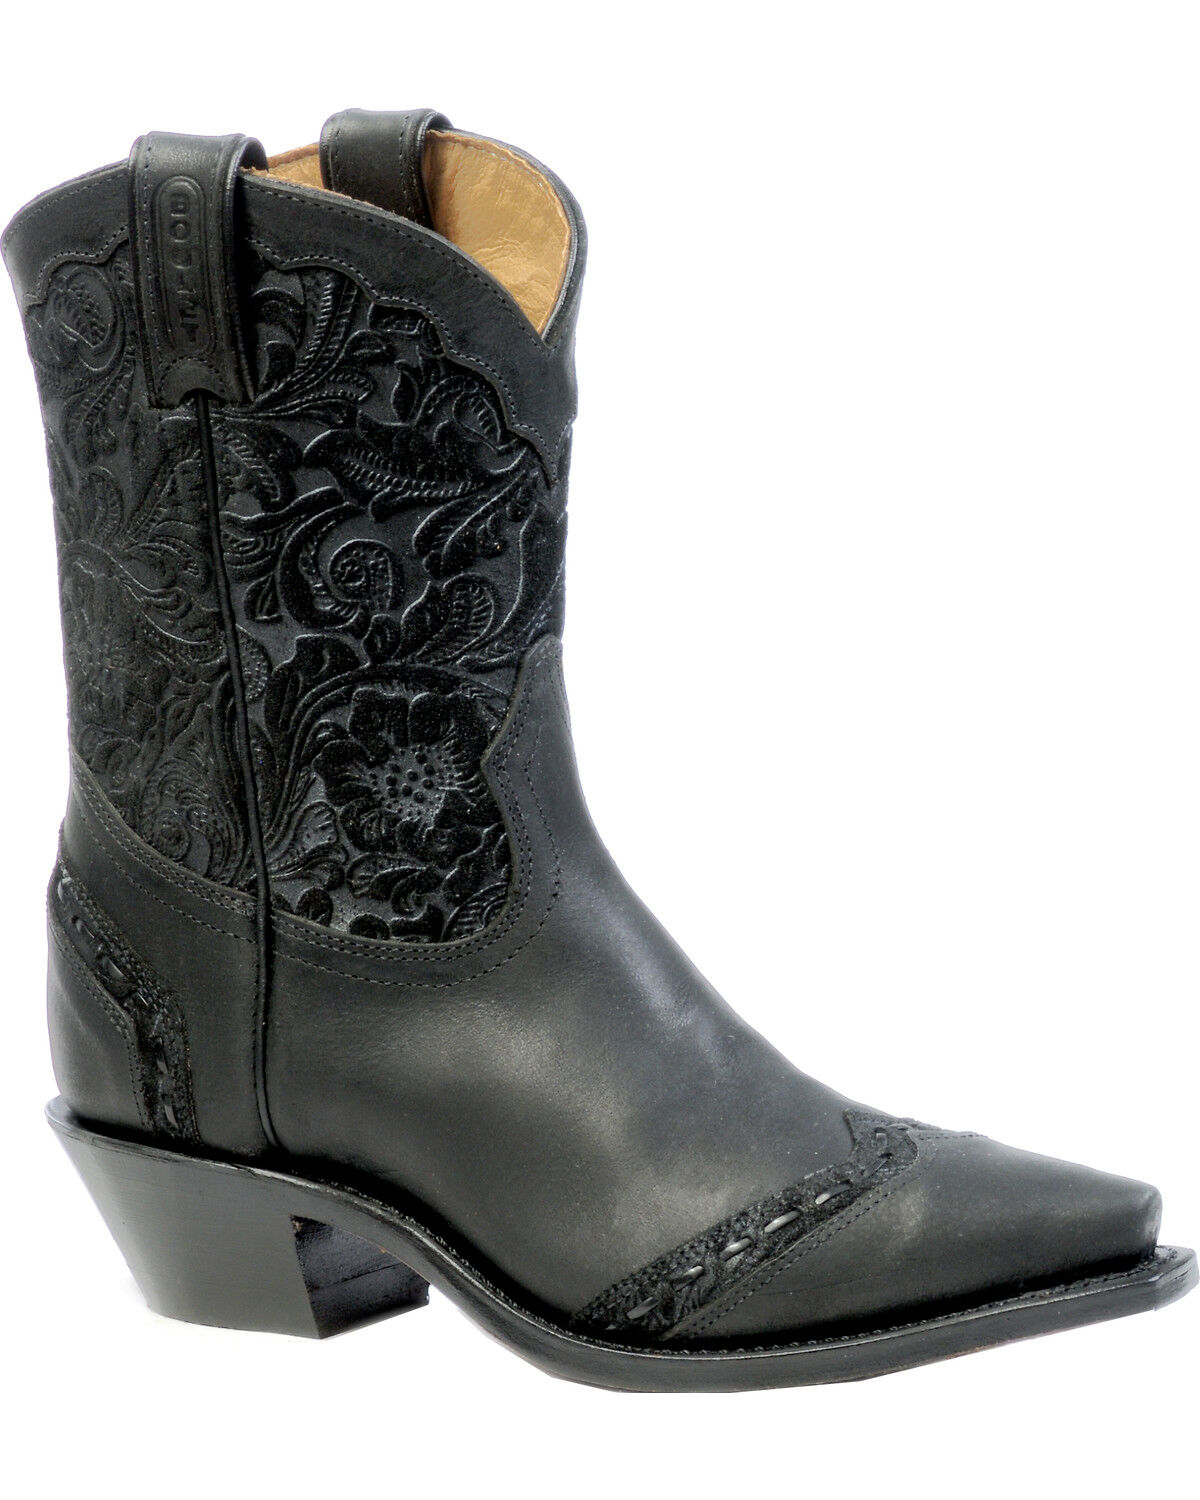 Boulet Boots - Country Outfitter